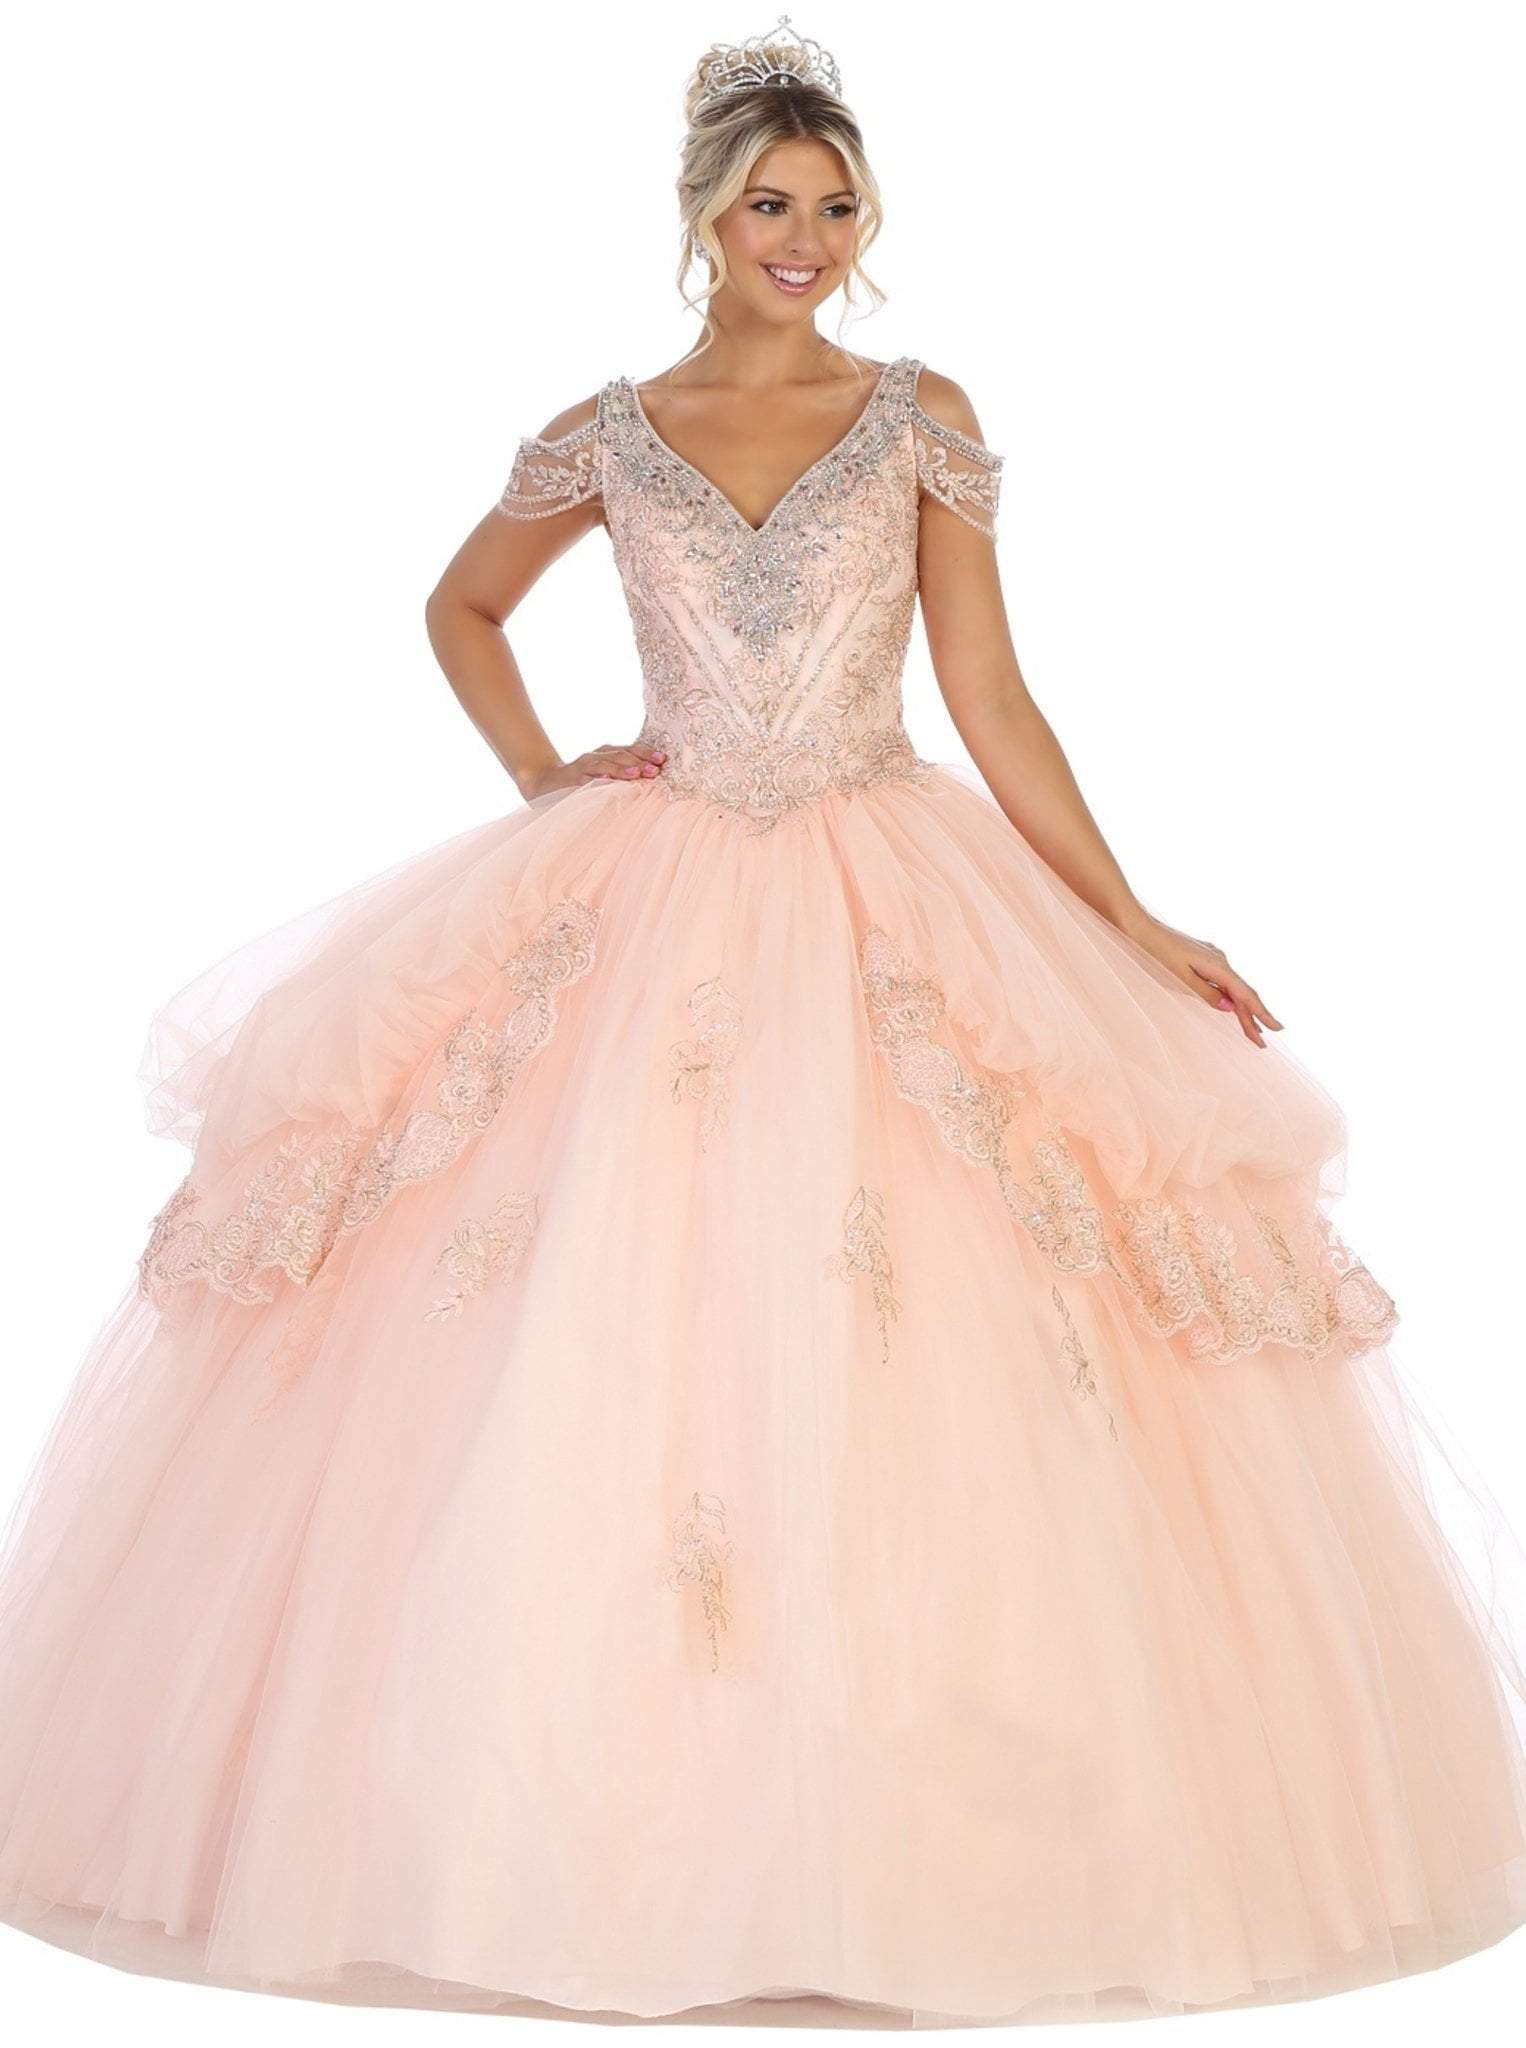 Image of May Queen - LK116 Jeweled Lace Bodice Ruffled Ballgown